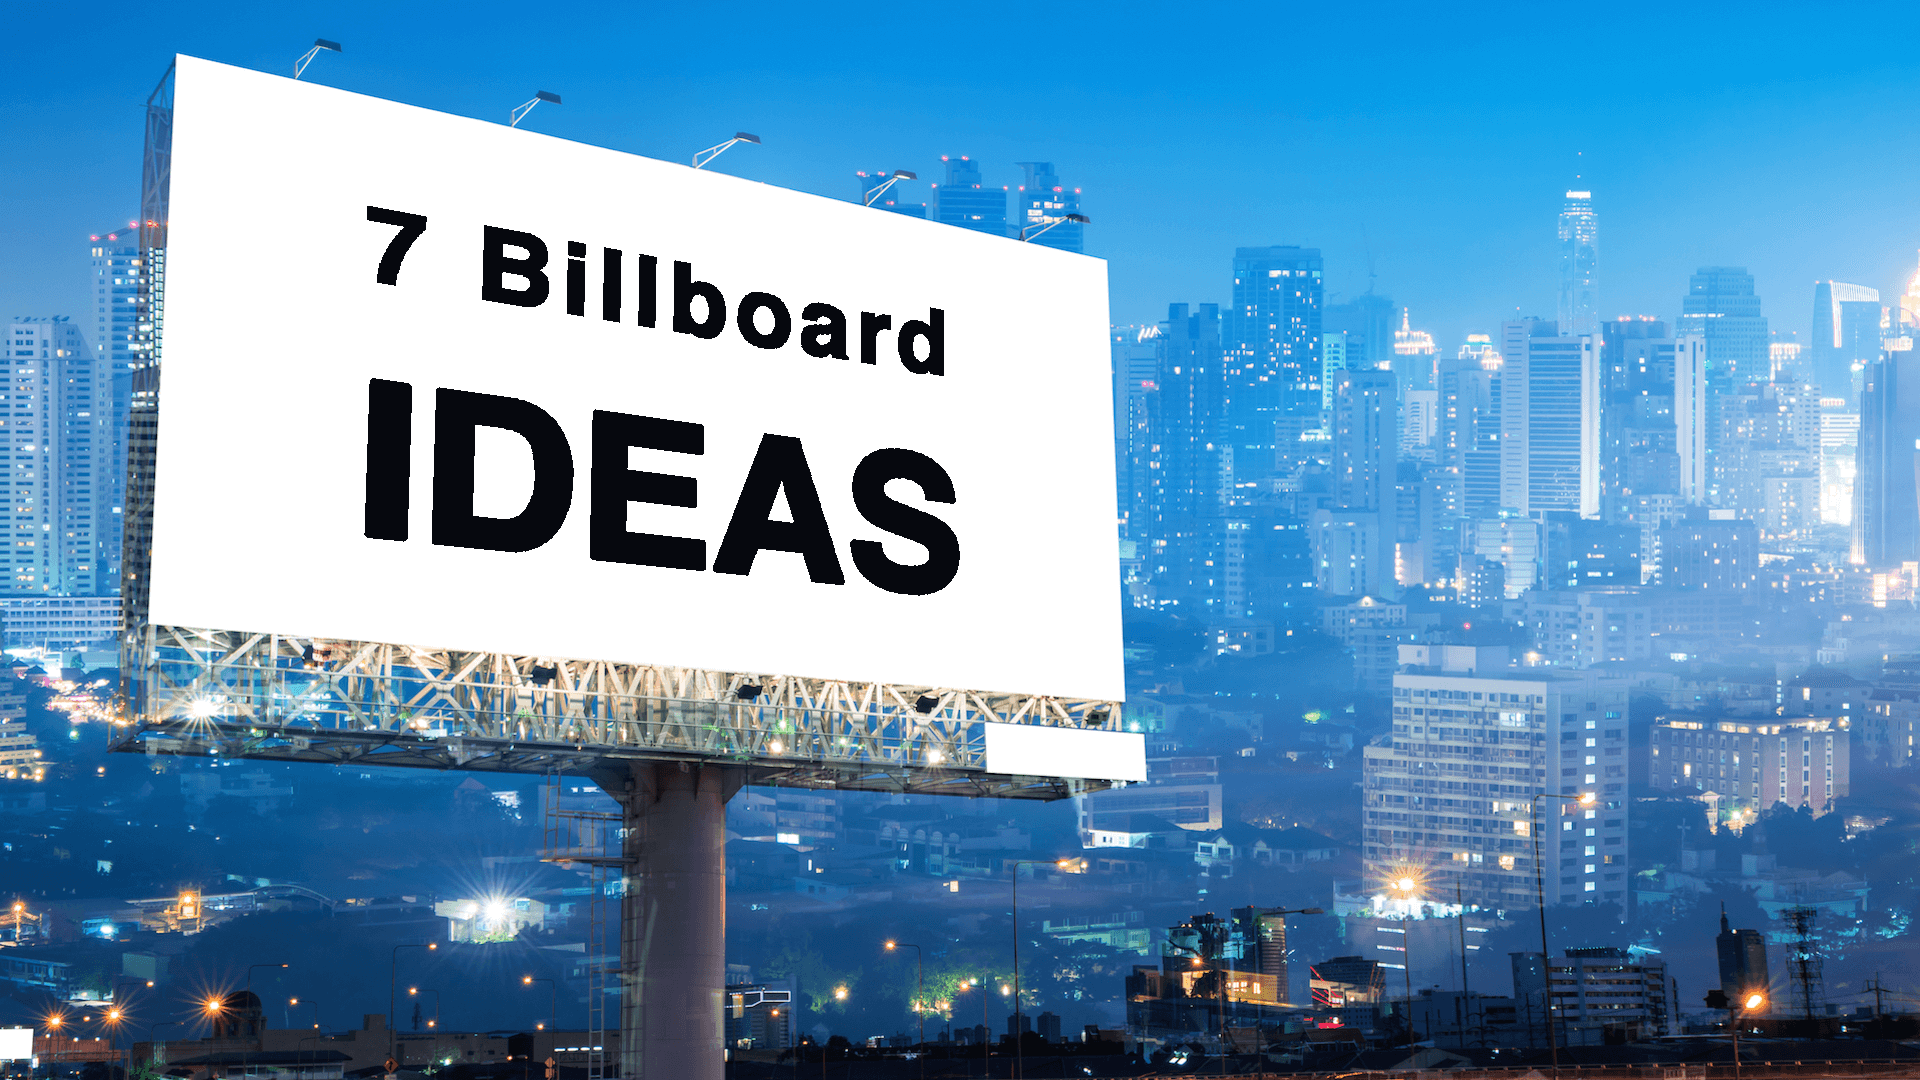 7 Awesome Billboard Ad Examples For Real Estate Facebook Lead Generation Strategies Tutorials Much More